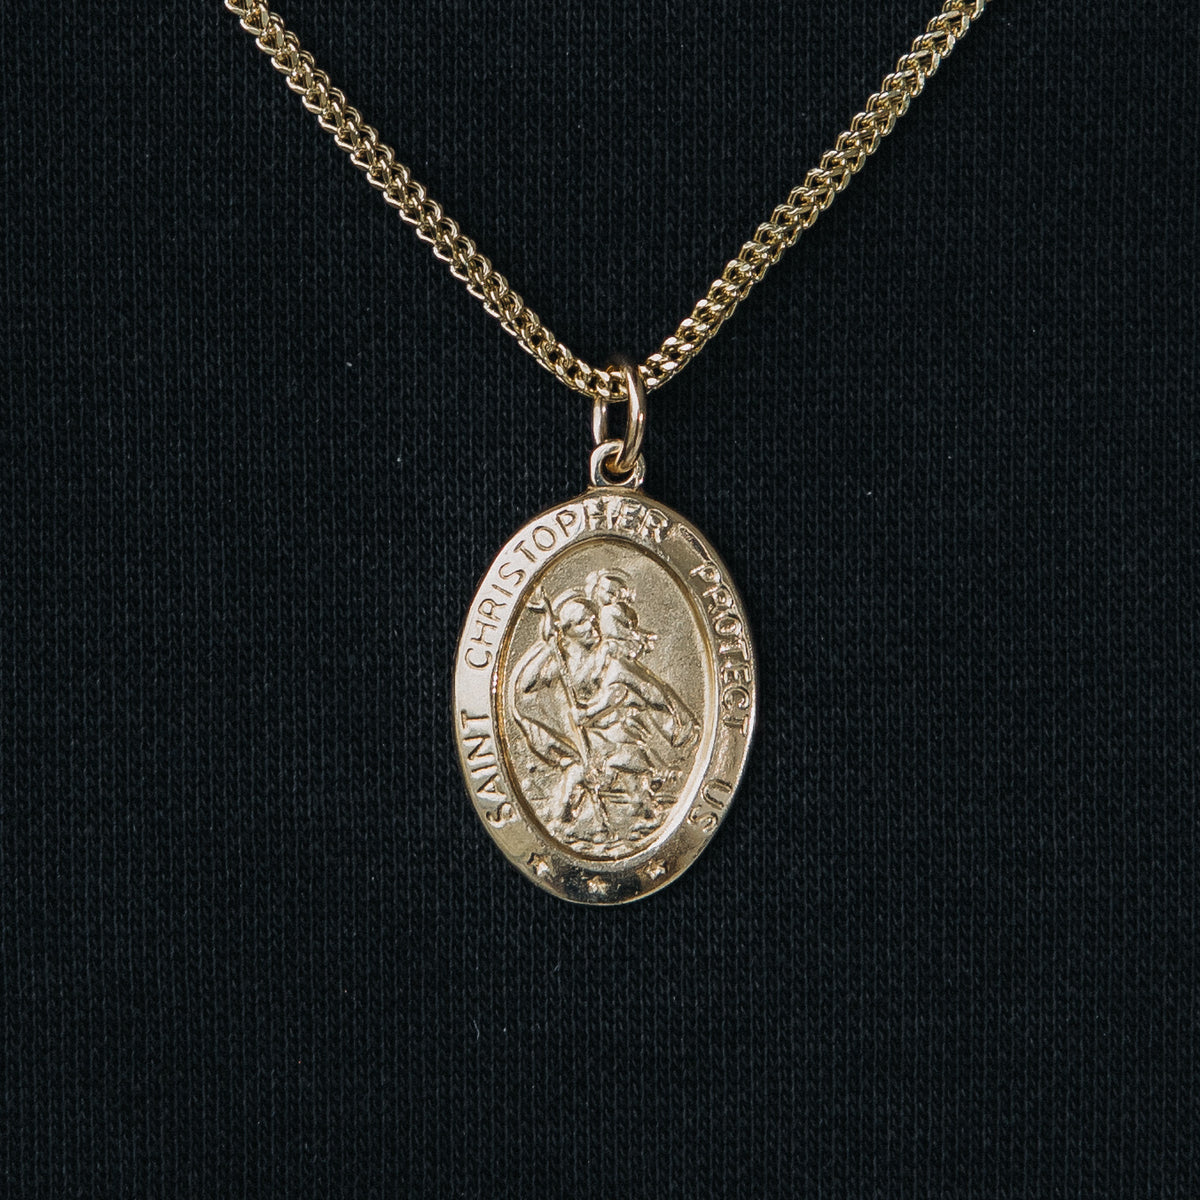 Amazon.com: Gold St Christopher Necklace - Mens Saint Pendant Travelers,  Gift Religious Jewelry, Protection Medal, Men Silver Medallion, Women Gift  to Husband, Best Friend Present, Catholic Charm (Gold) : Handmade Products